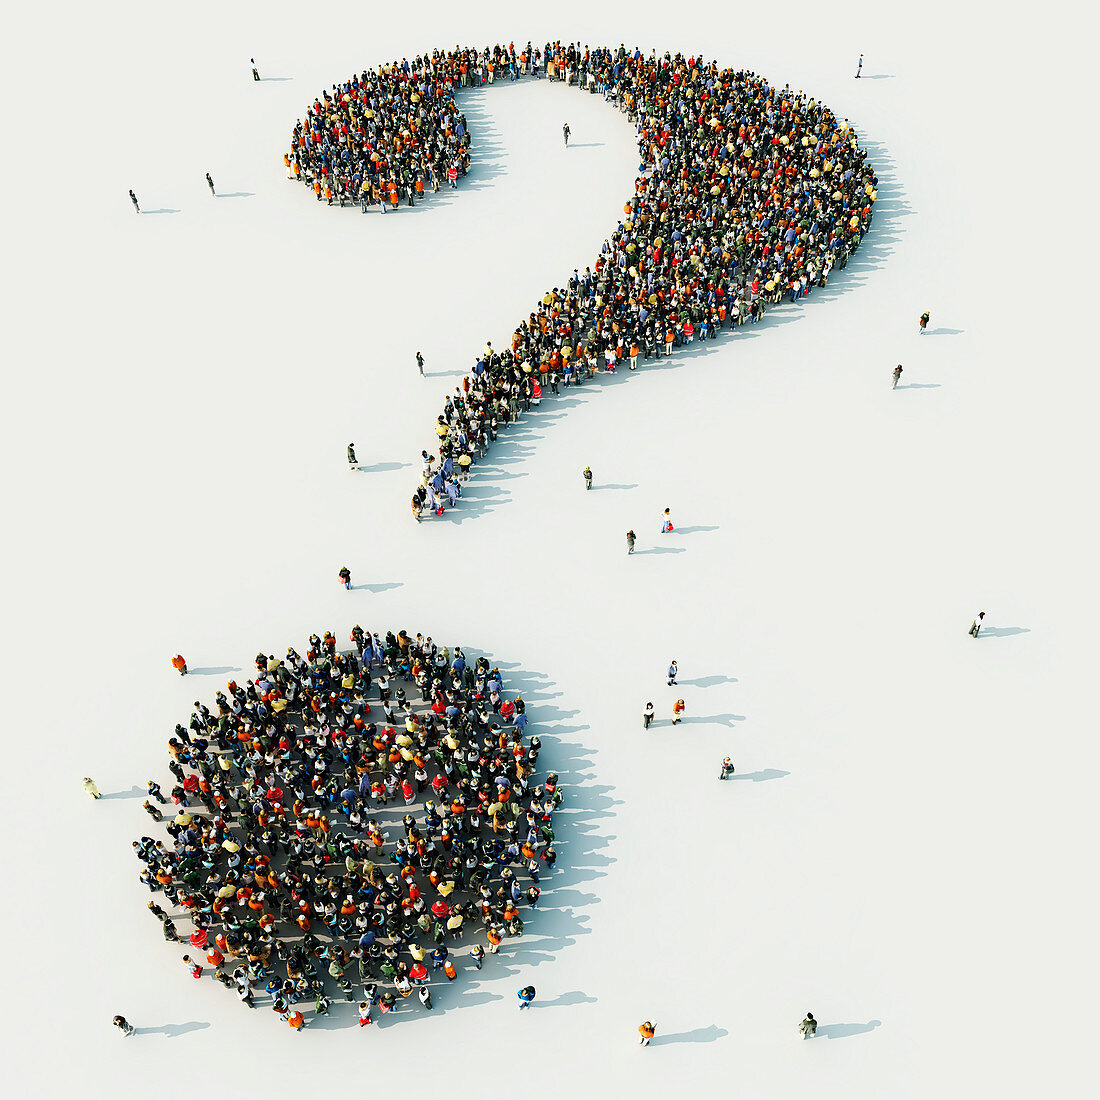 People arranged in question mark, illustration